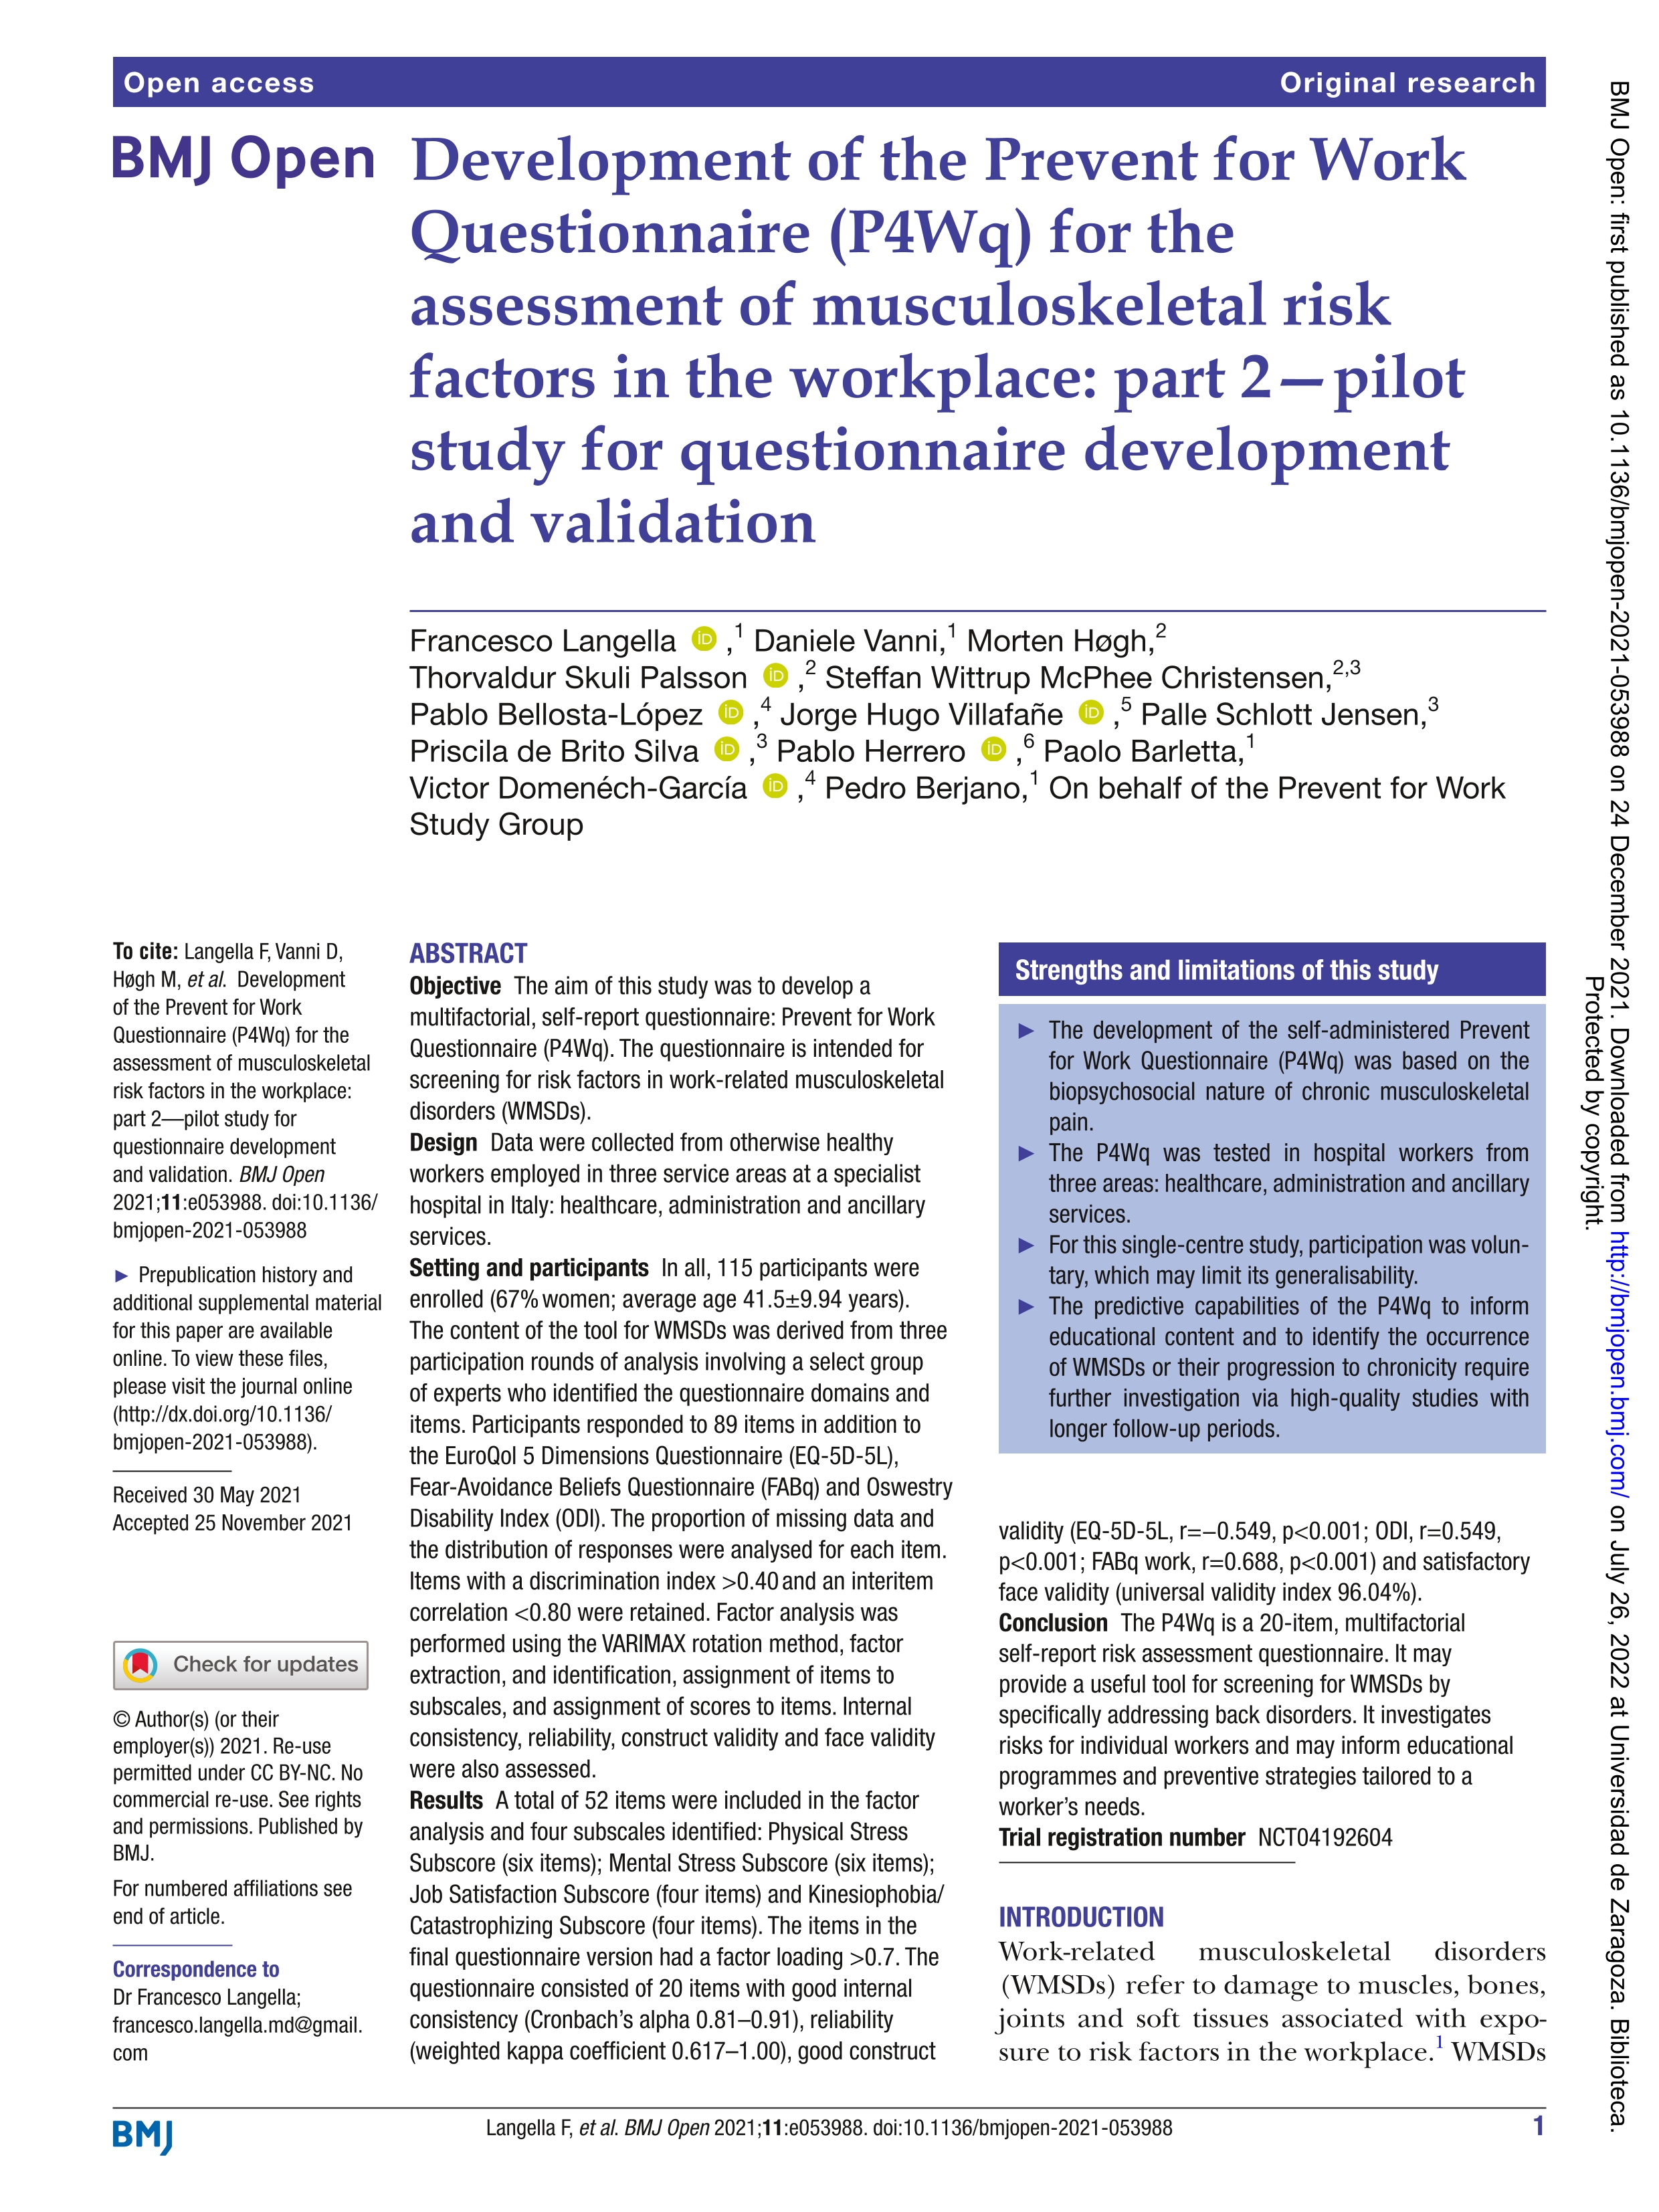 Development of the Prevent for Work Questionnaire (P4Wq) for the assessment of musculoskeletal risk factors in the workplace: part 2-pilot study for questionnaire development and validation